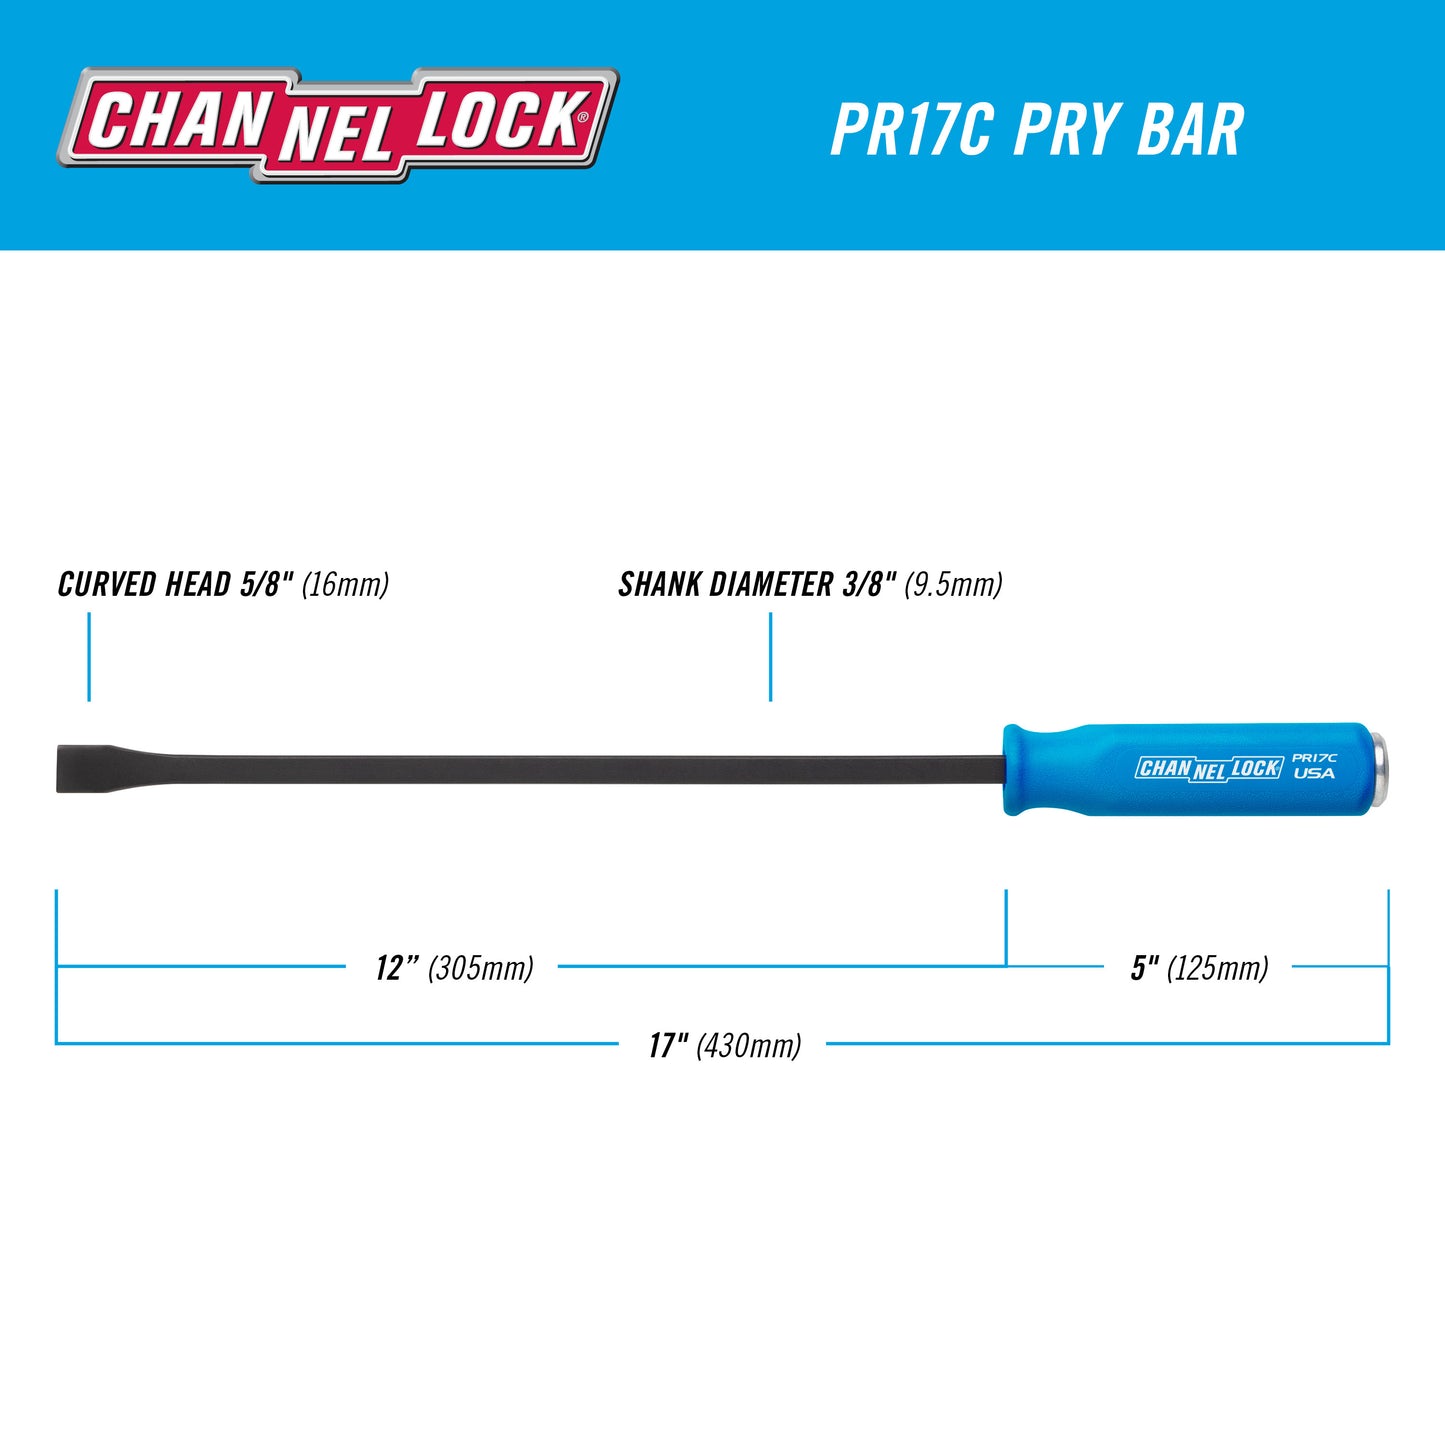 5/8 x 12-inch Professional Pry Bar, 17-inch Overall Length (PR17C)